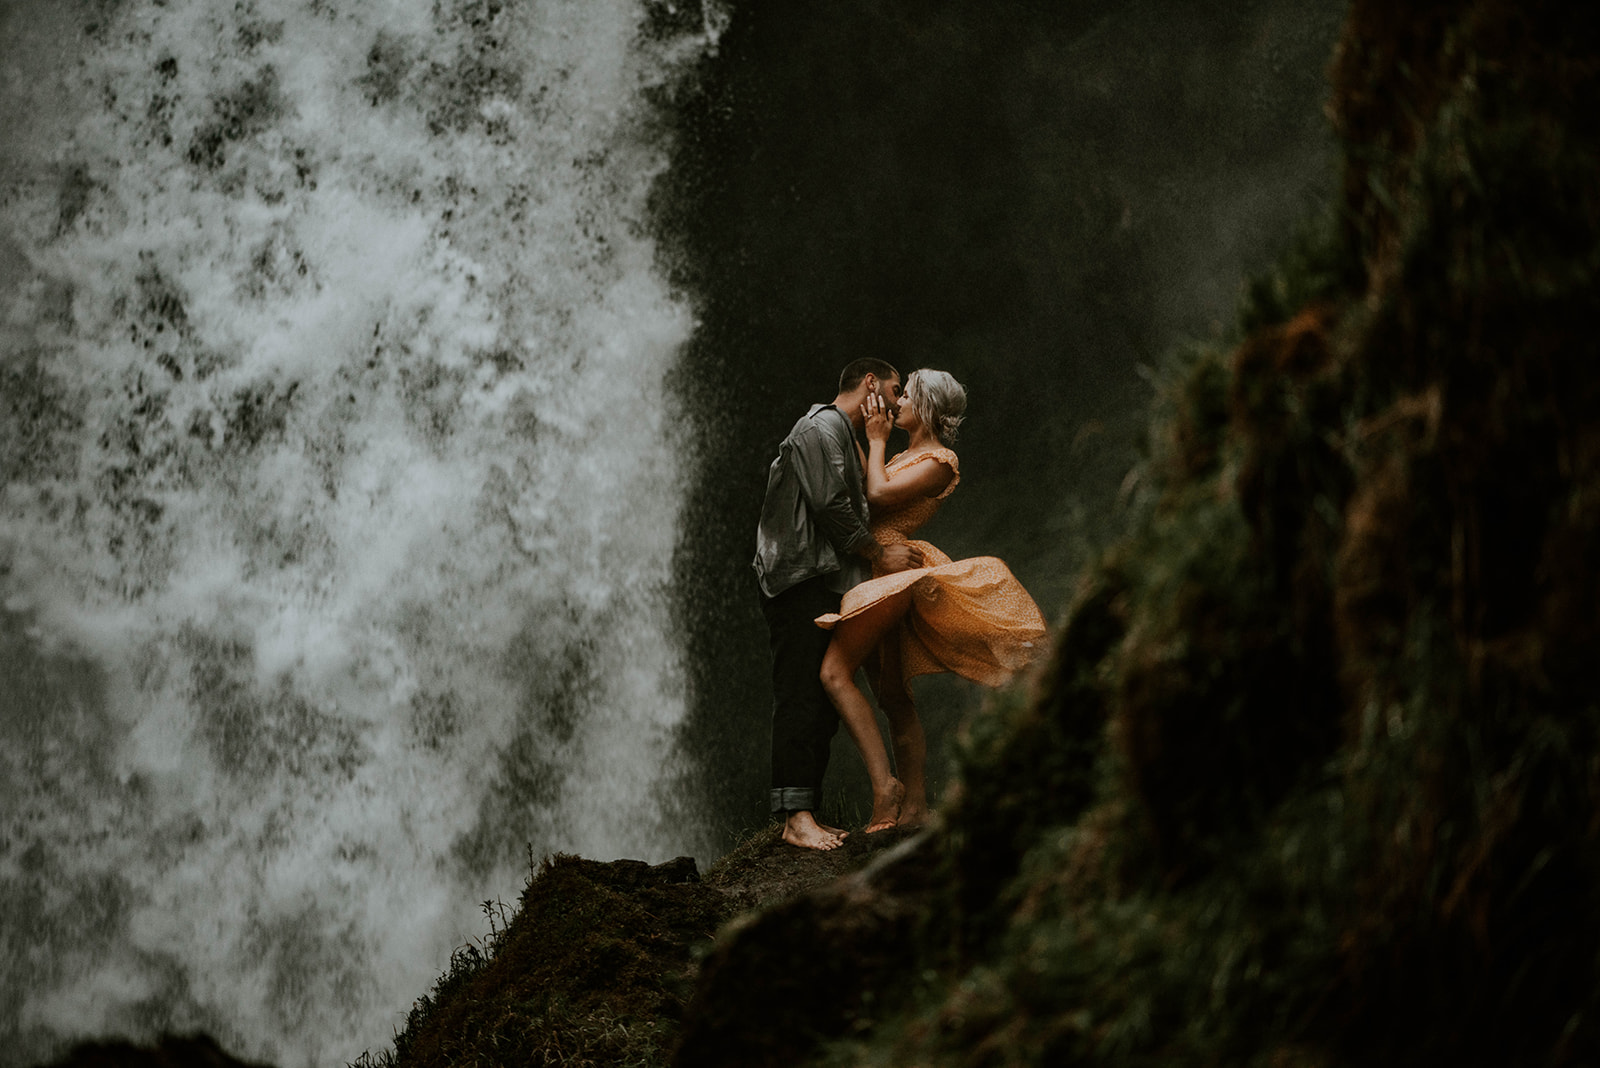 A woman in a yellow dress and a man in a grey shirt kissing under a waterfall while her dress blows